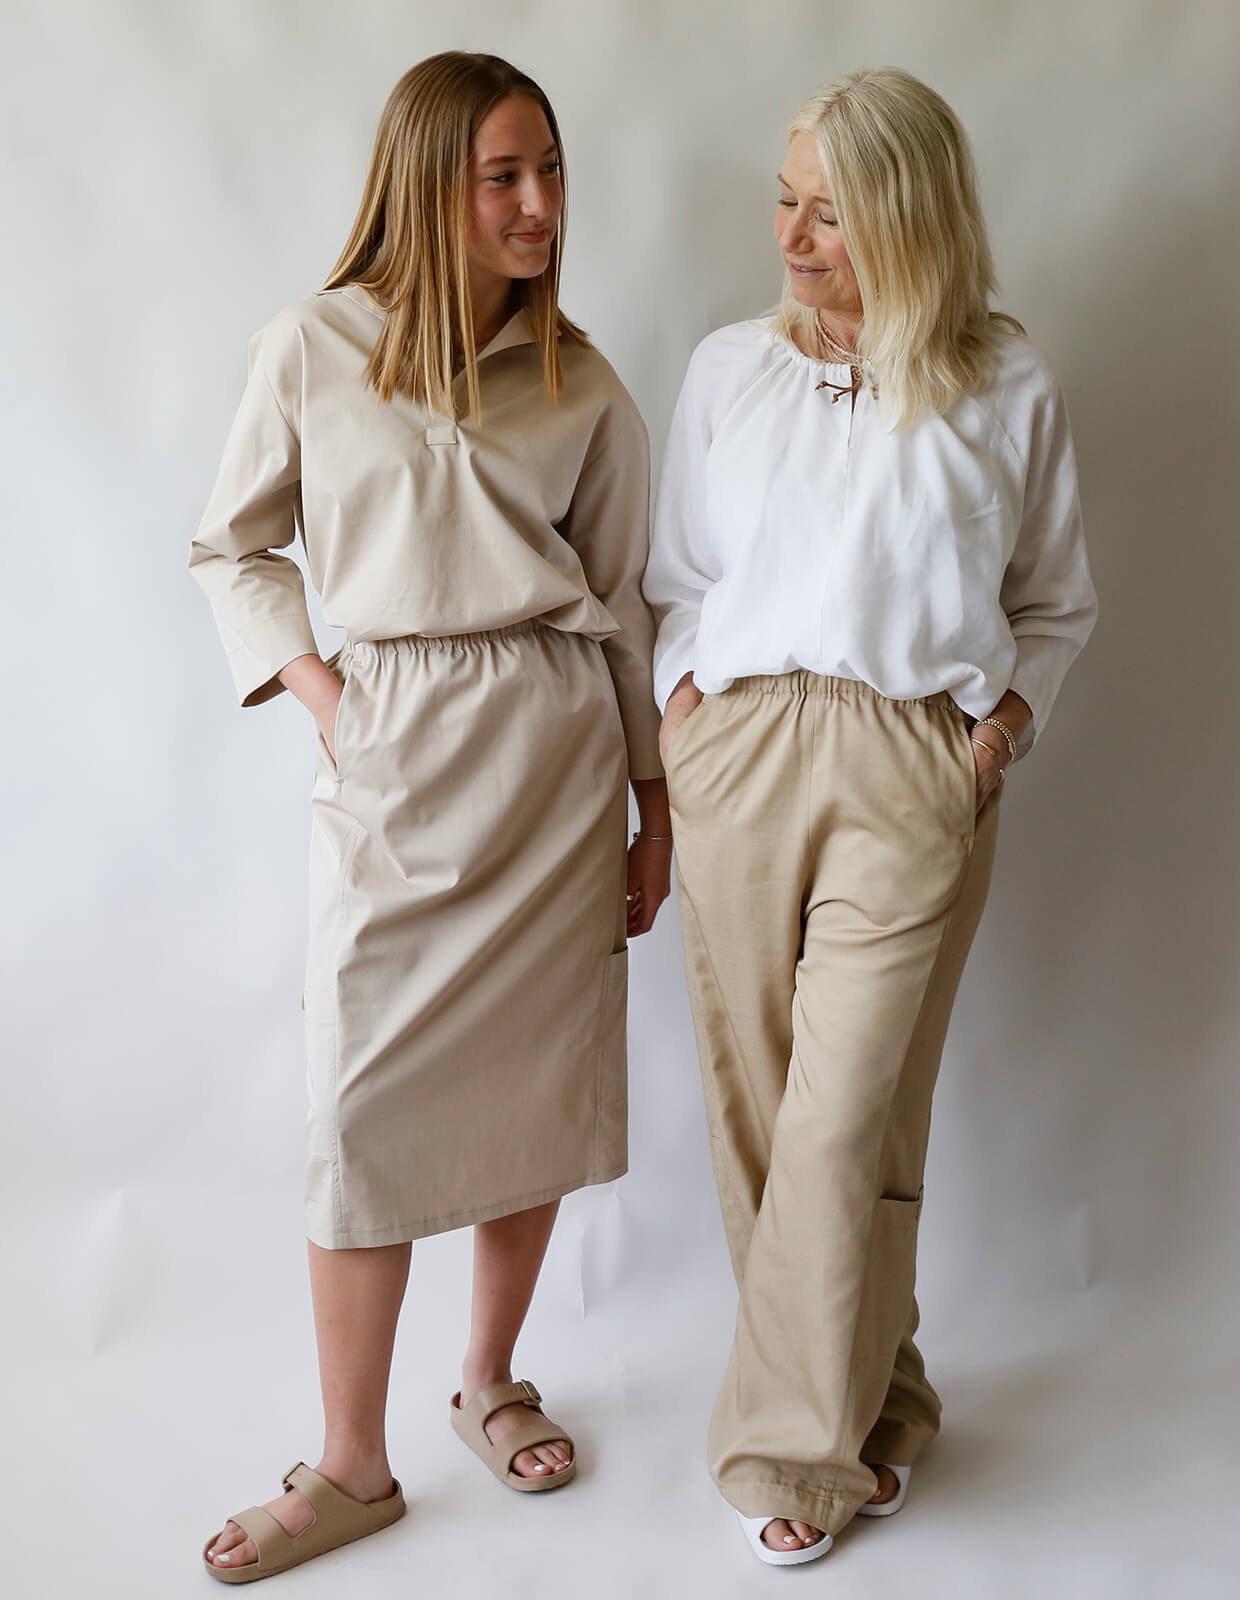 Women wearing the Utility Pant and Skirt sewing pattern from The Maker's Atelier on The Fold Line. A trouser and skirt pattern made in cupro, Tencel, and viscose mixed fabrics, featuring pockets and patch pockets, relaxed fit, elasticated waists, below kn